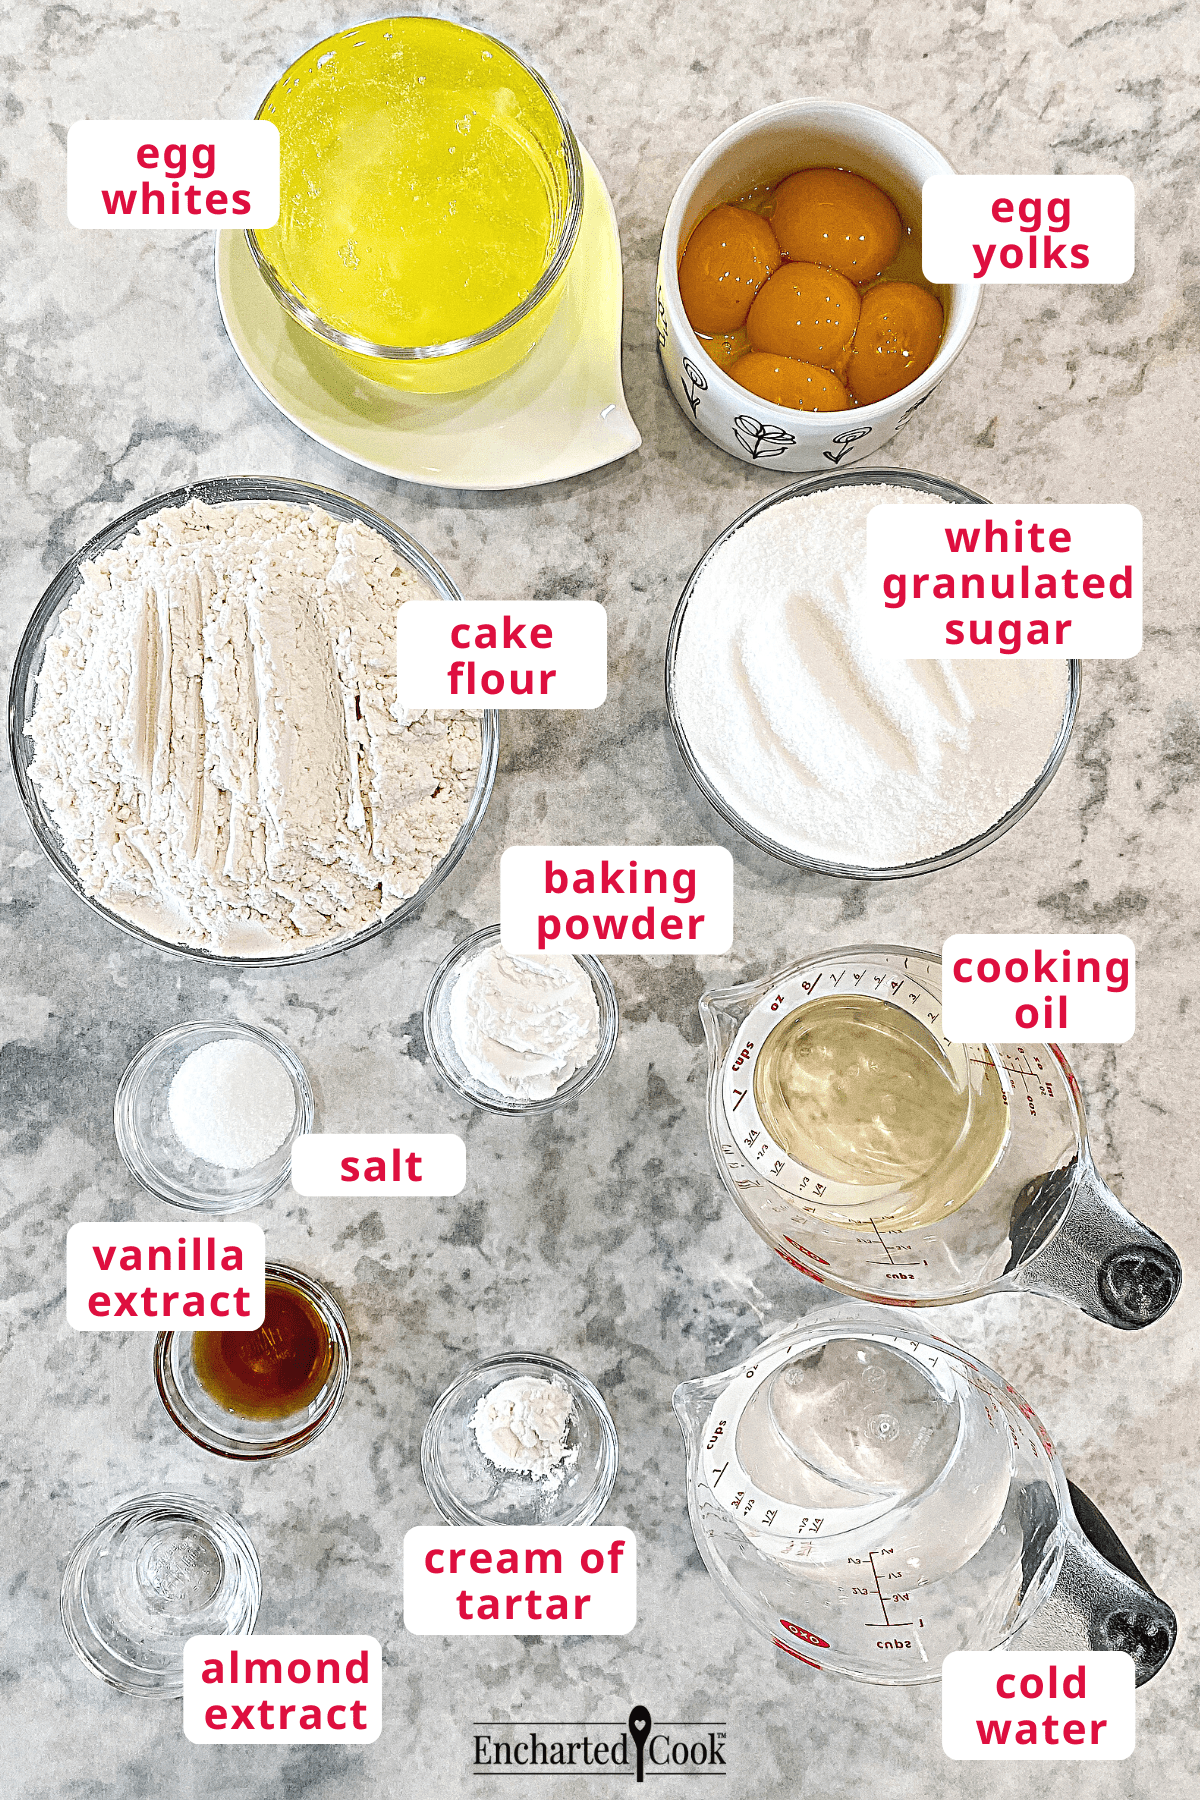 The cake ingredients, clockwise from top right: egg yolks, white granulated sugar, cooking oil, cold water, cream of tartar, almond extract, vanilla extract, salt, baking powder, cake flour, and egg whites.